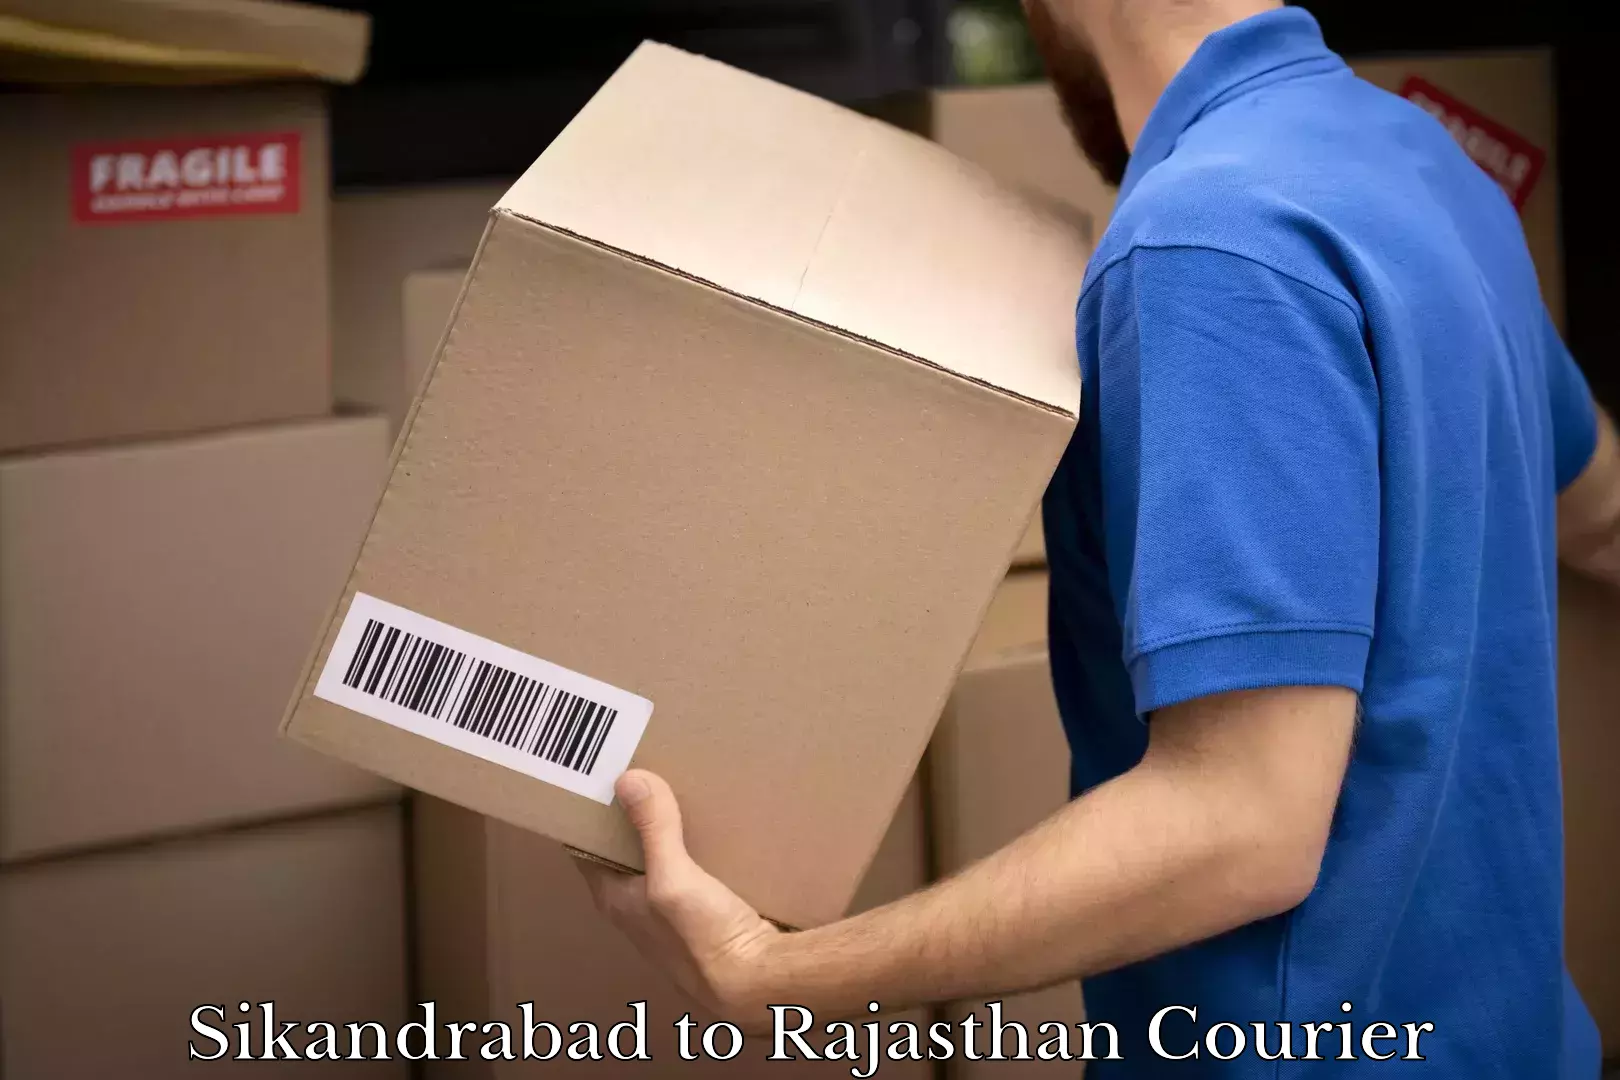 Courier service innovation in Sikandrabad to Rajasthan